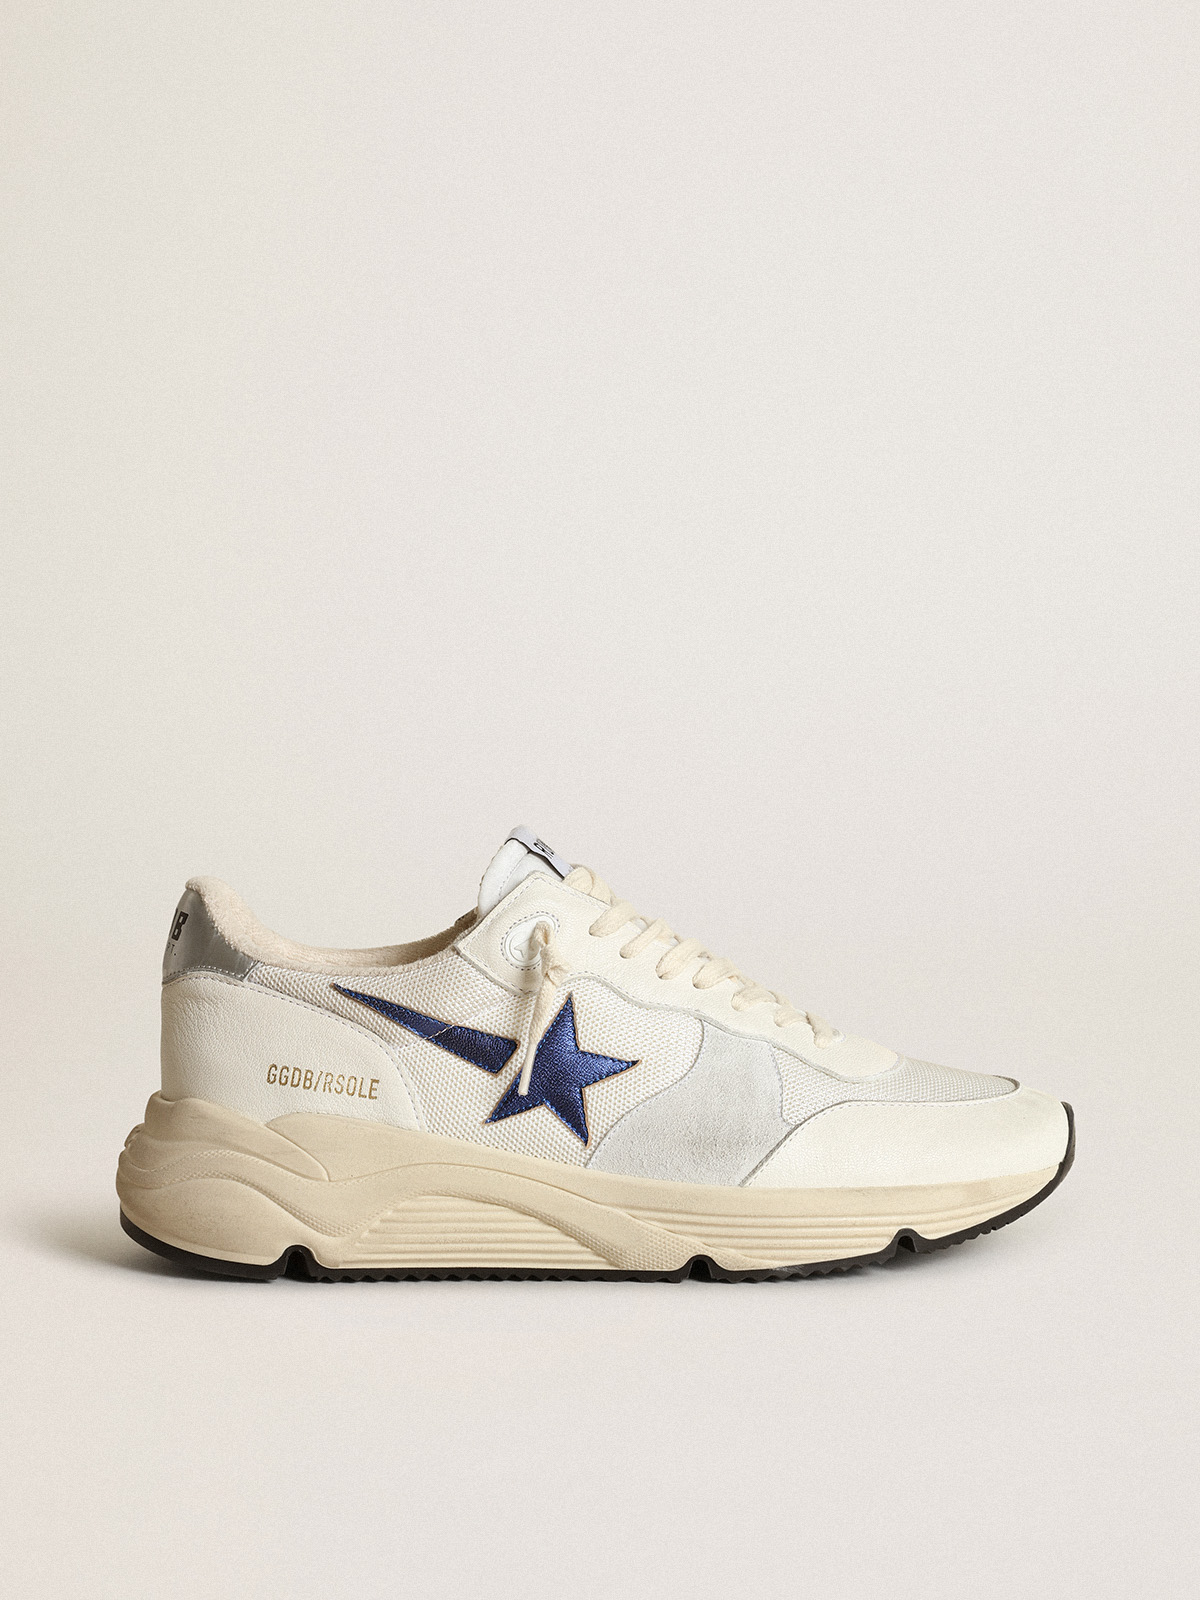 Running Sole in white mesh and nappa leather with a blue star | Golden Goose